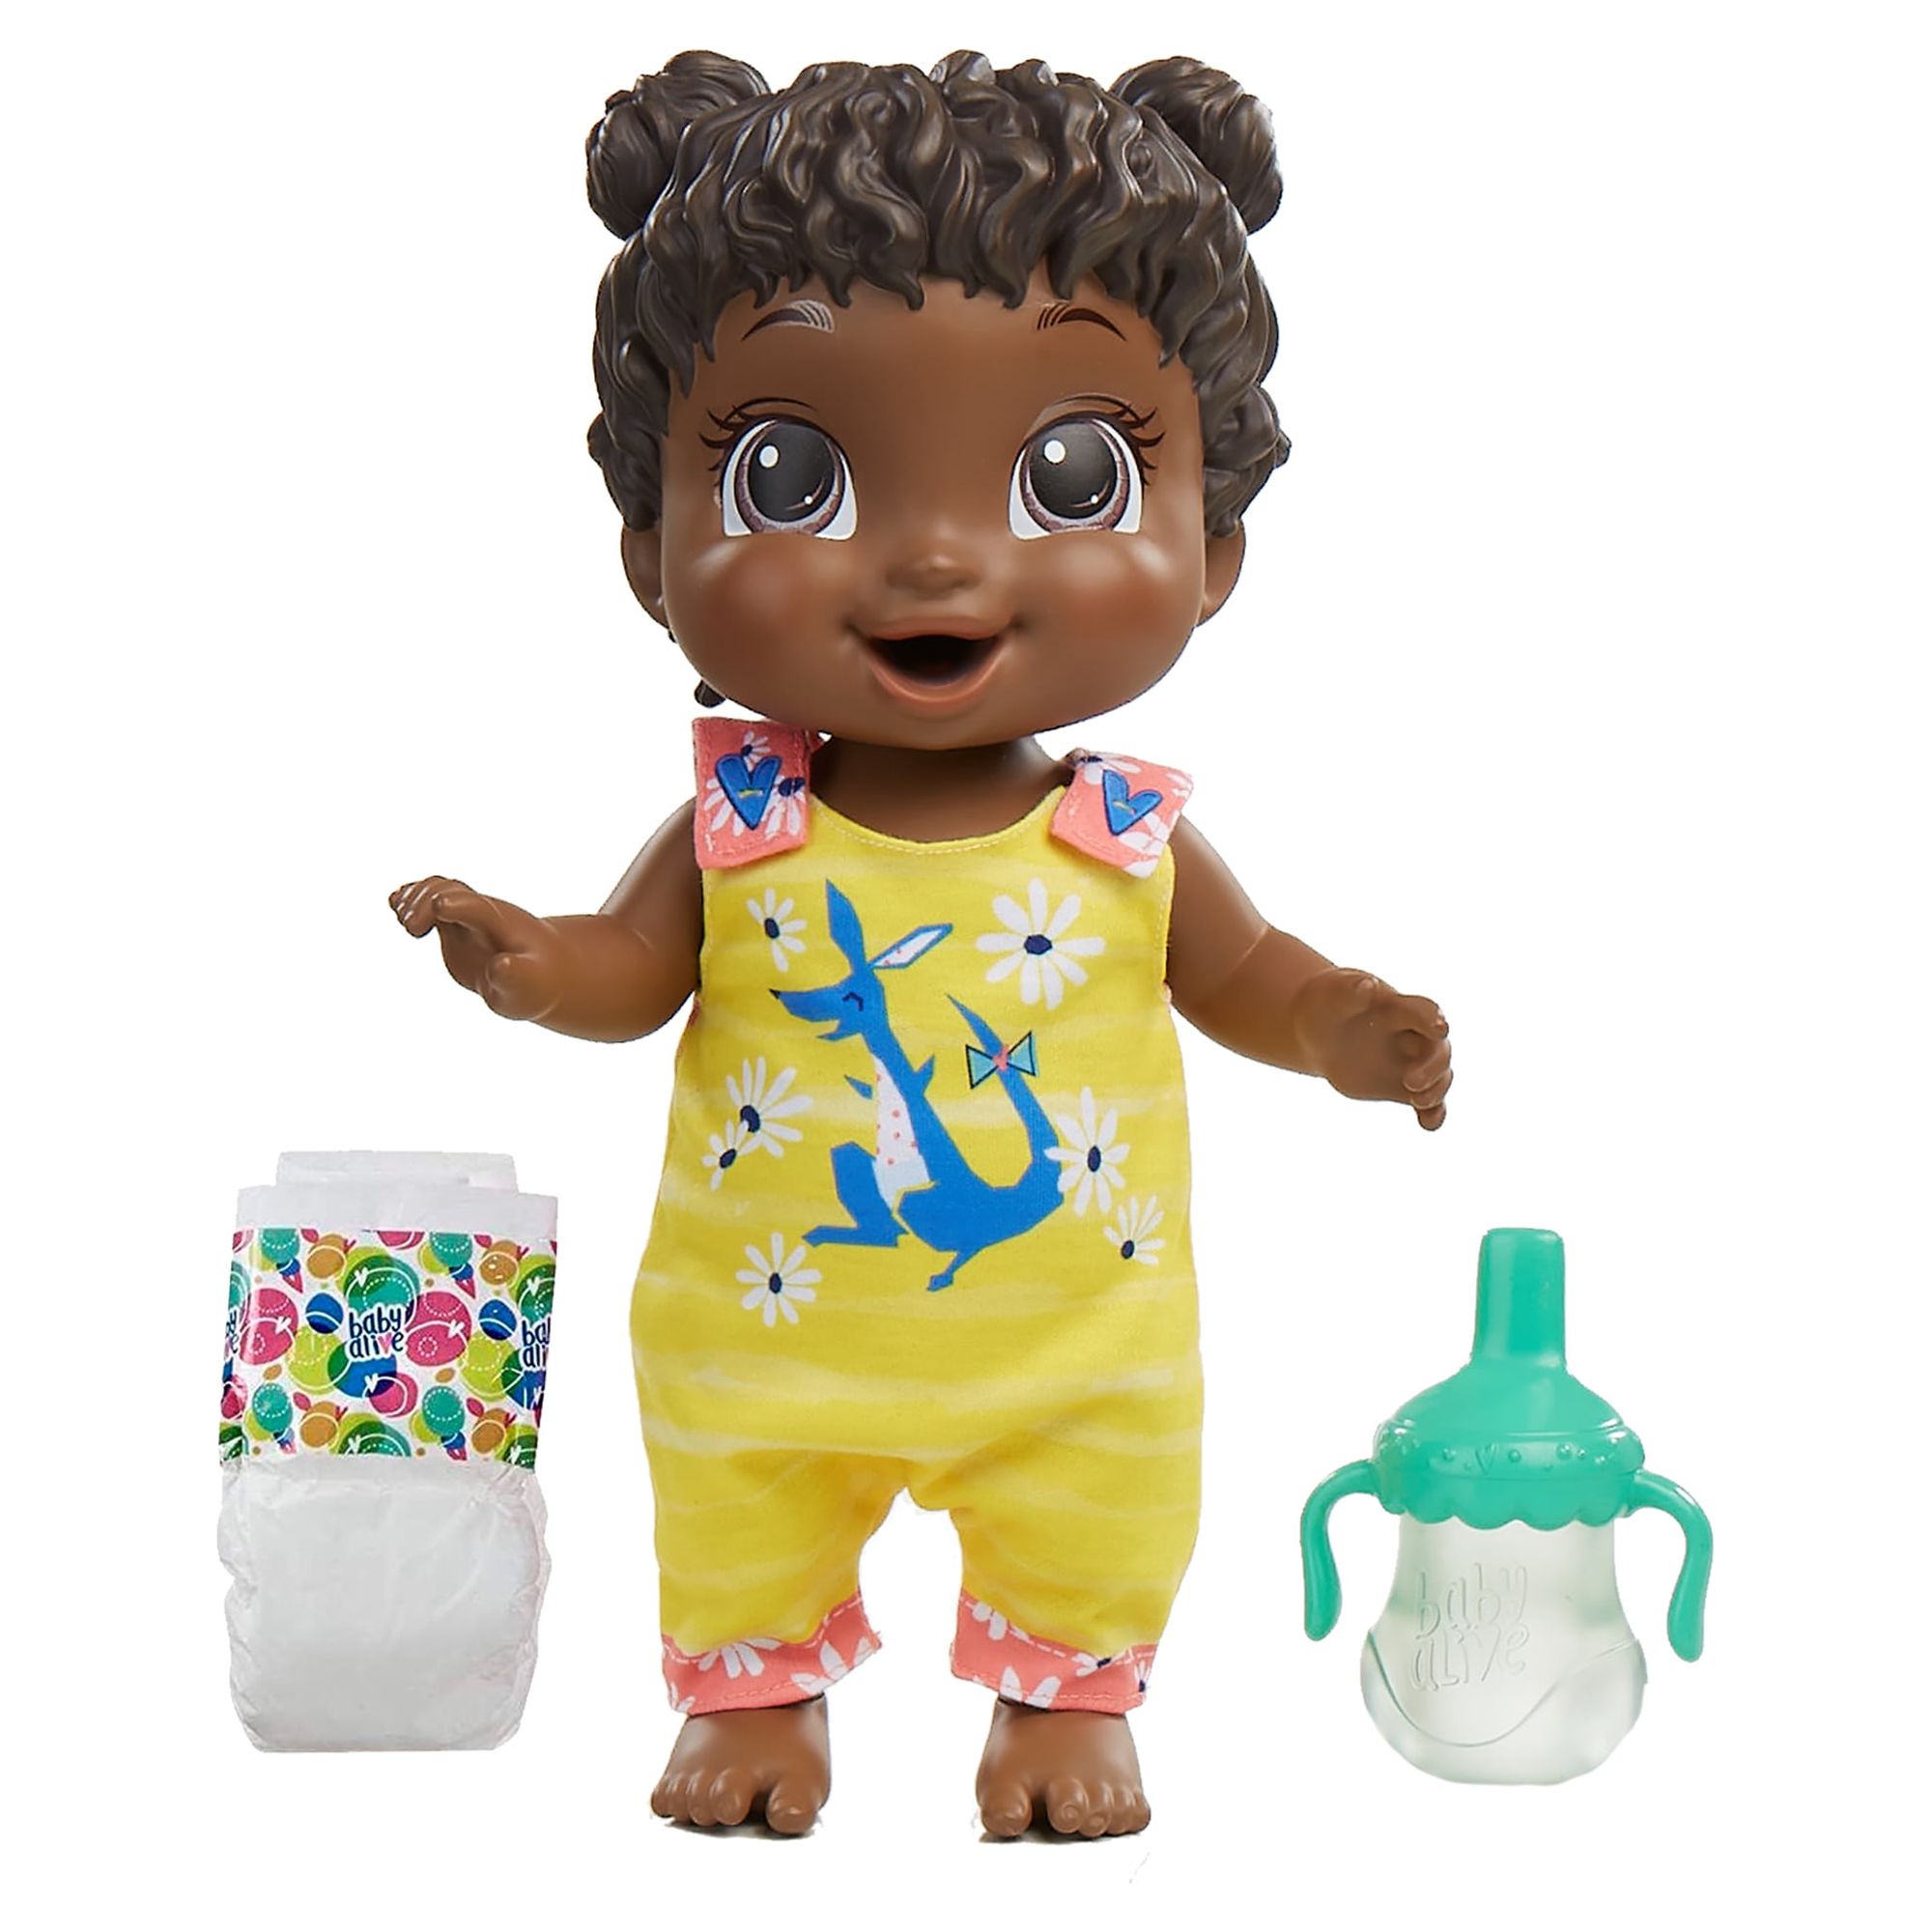 Baby Alive Baby Gotta Bounce Doll, Kangaroo, Bounces with 25+ SFX - image 1 of 7